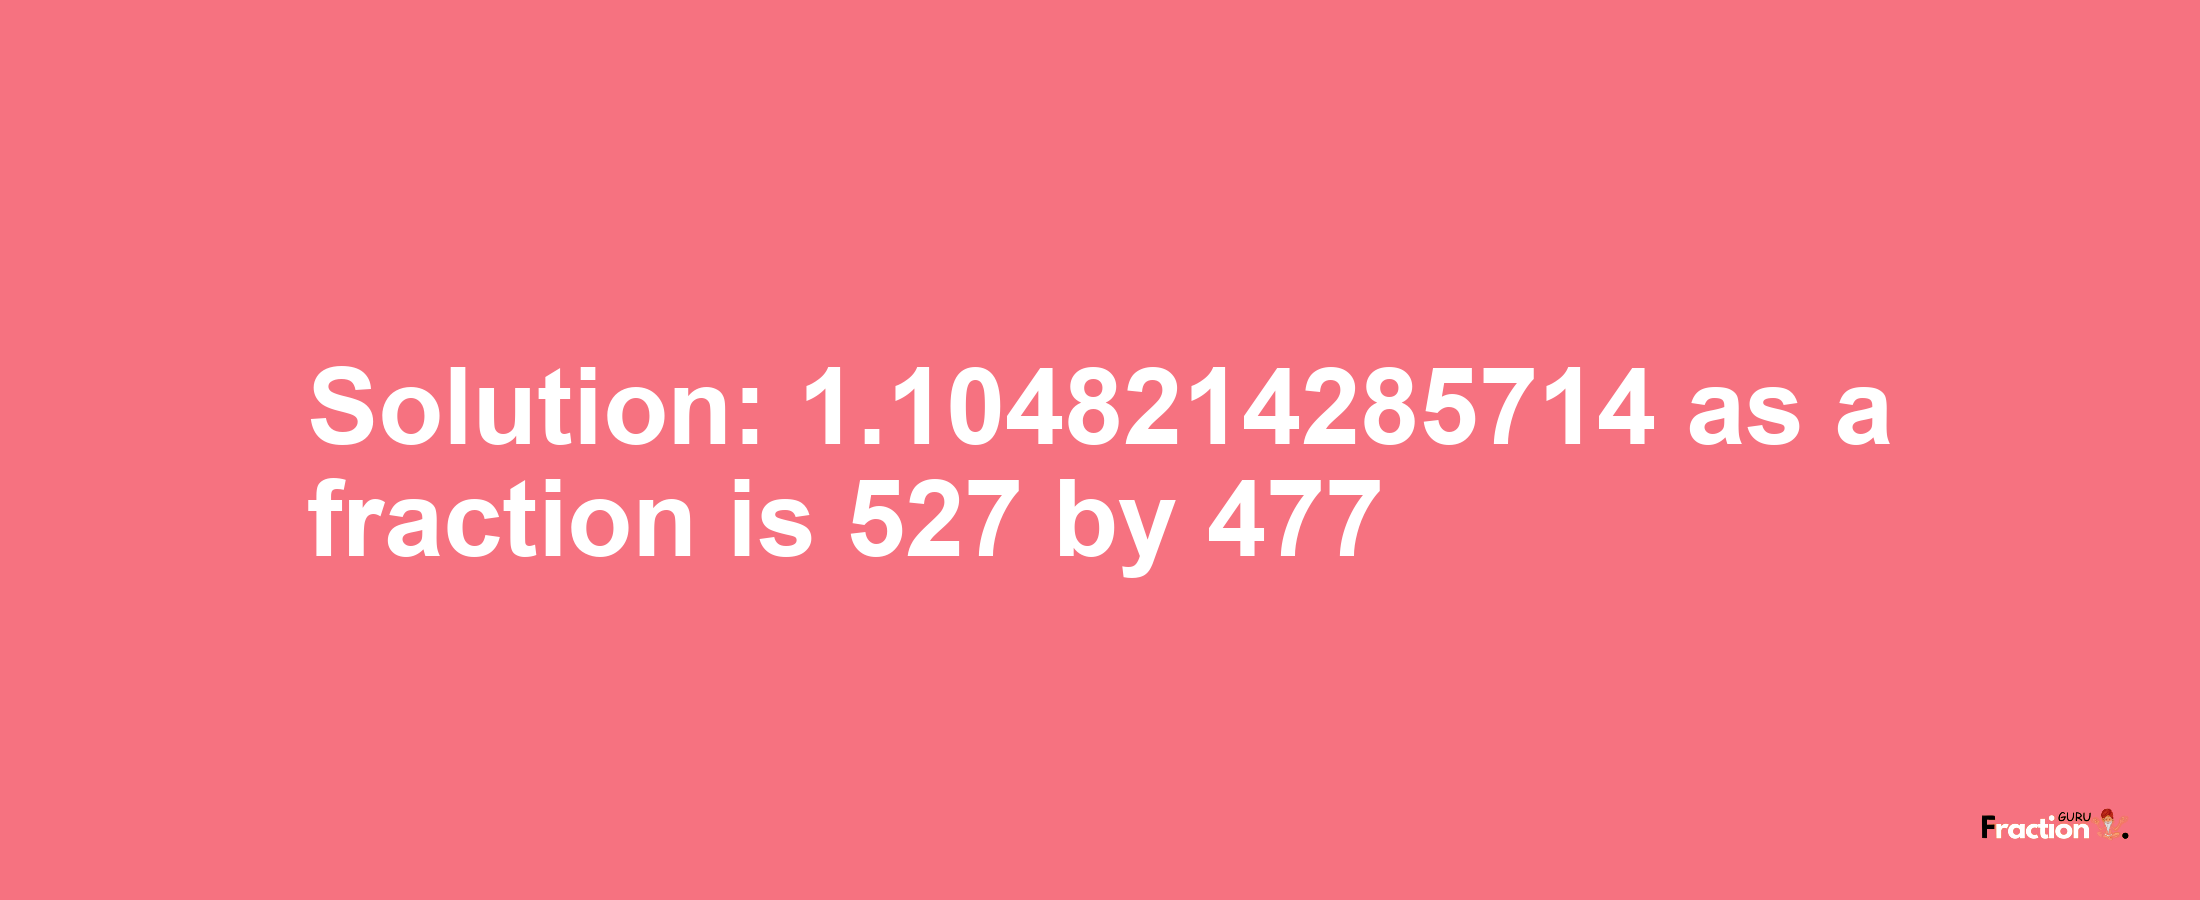 Solution:1.1048214285714 as a fraction is 527/477